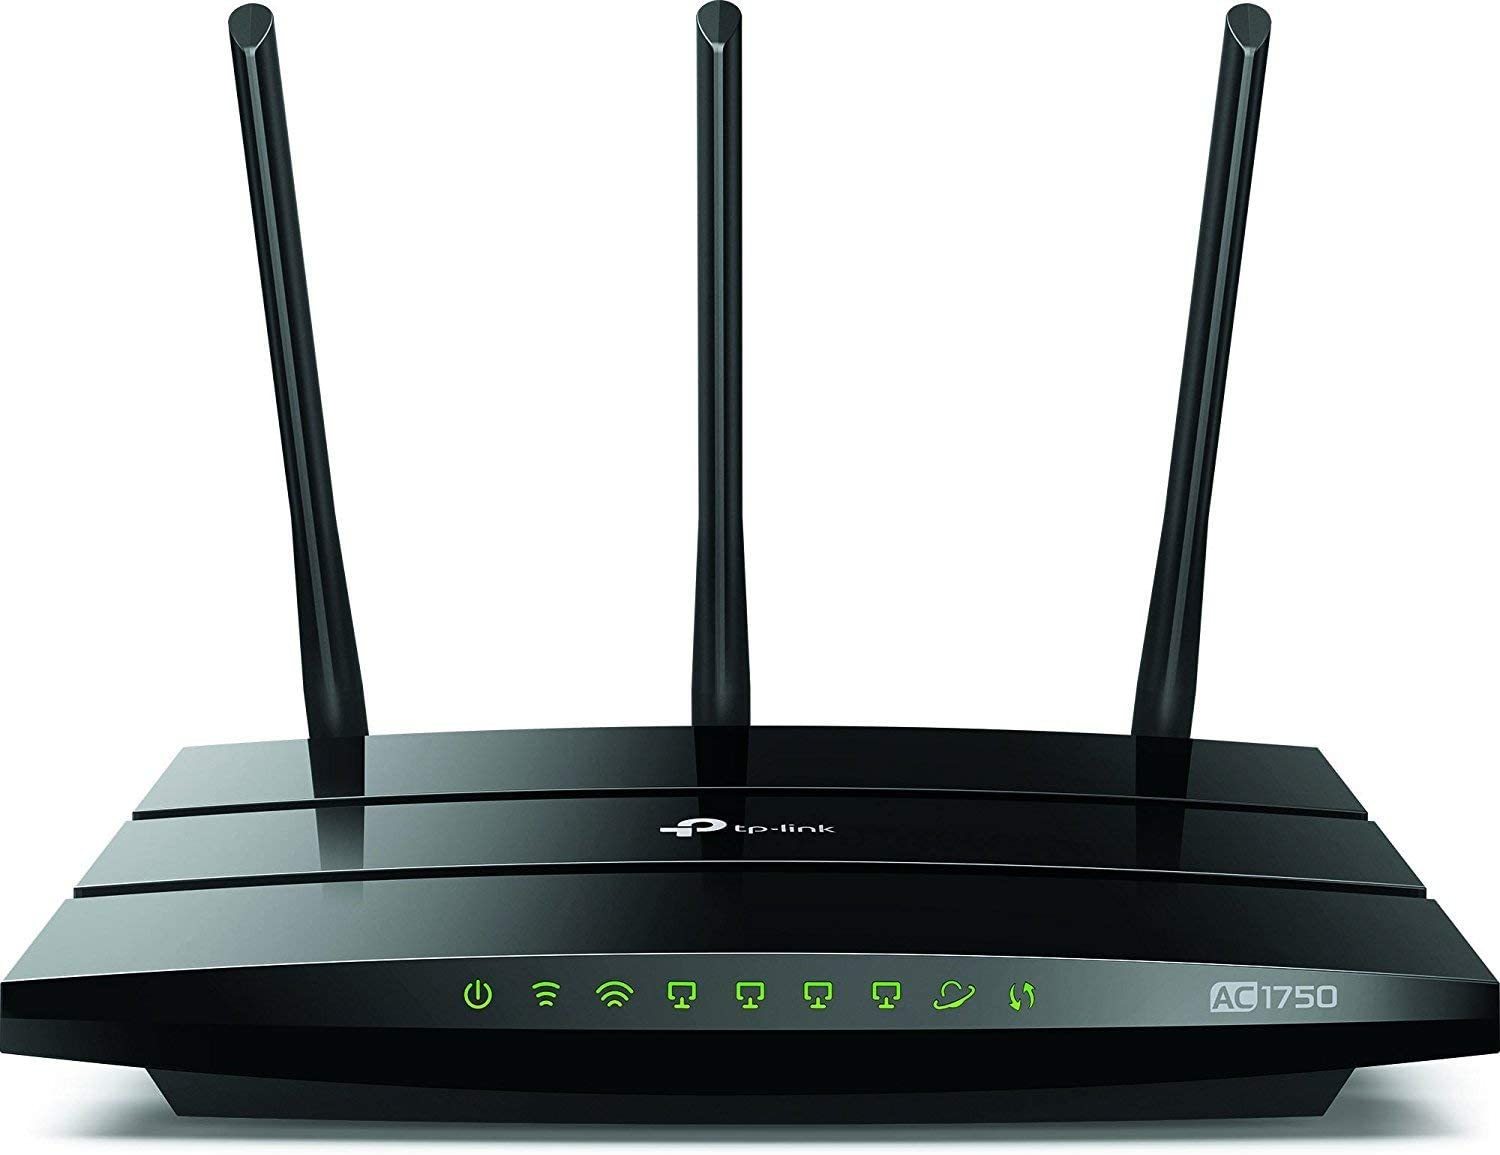 tp-link AC1750 Smart WiFi Router - Dual Band Gigabit Wireless Internet Routers - $51.99